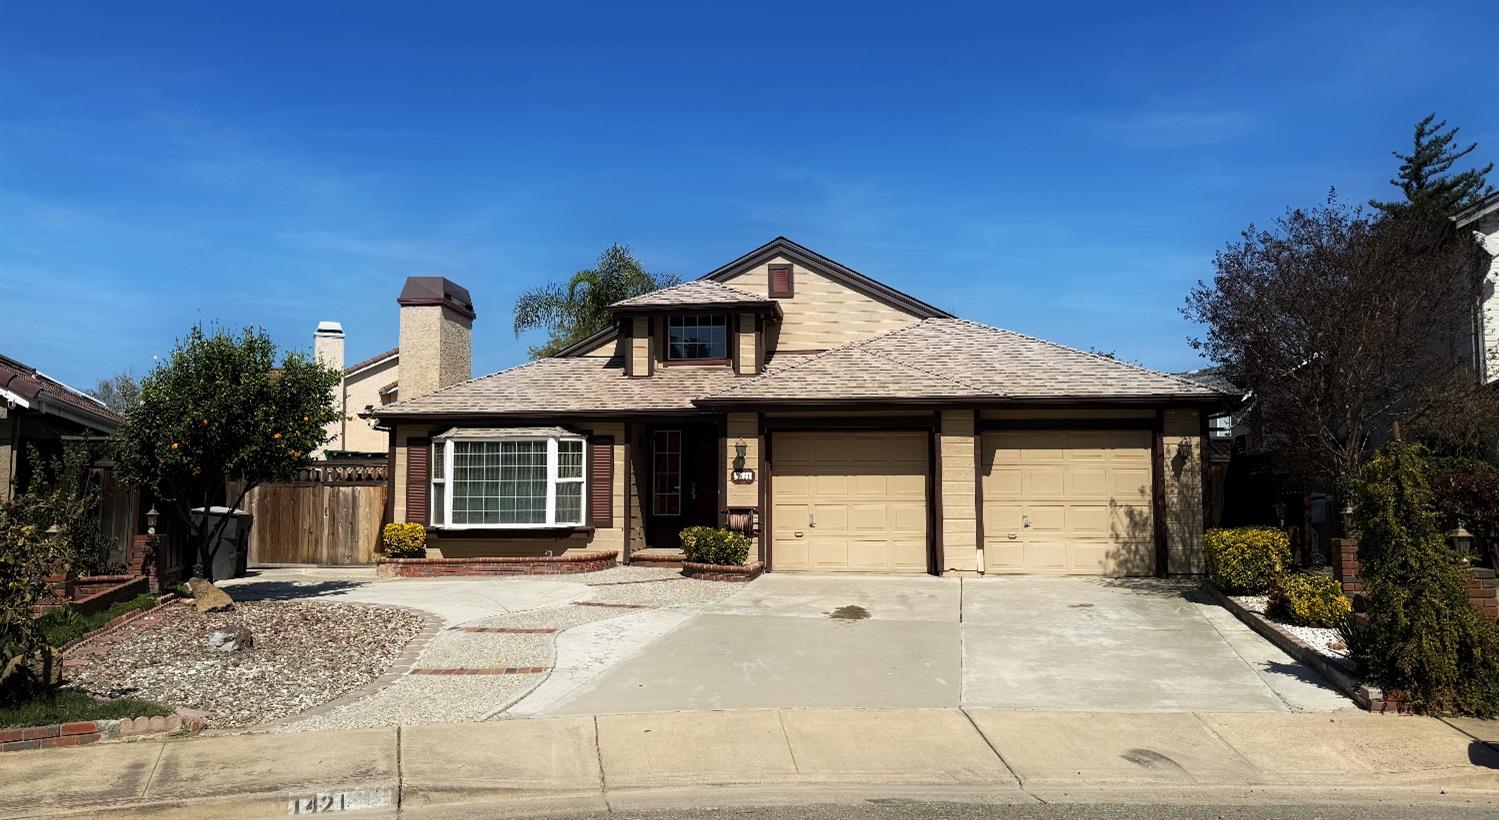 Photo of 1421 Pecan Ln in Tracy, CA